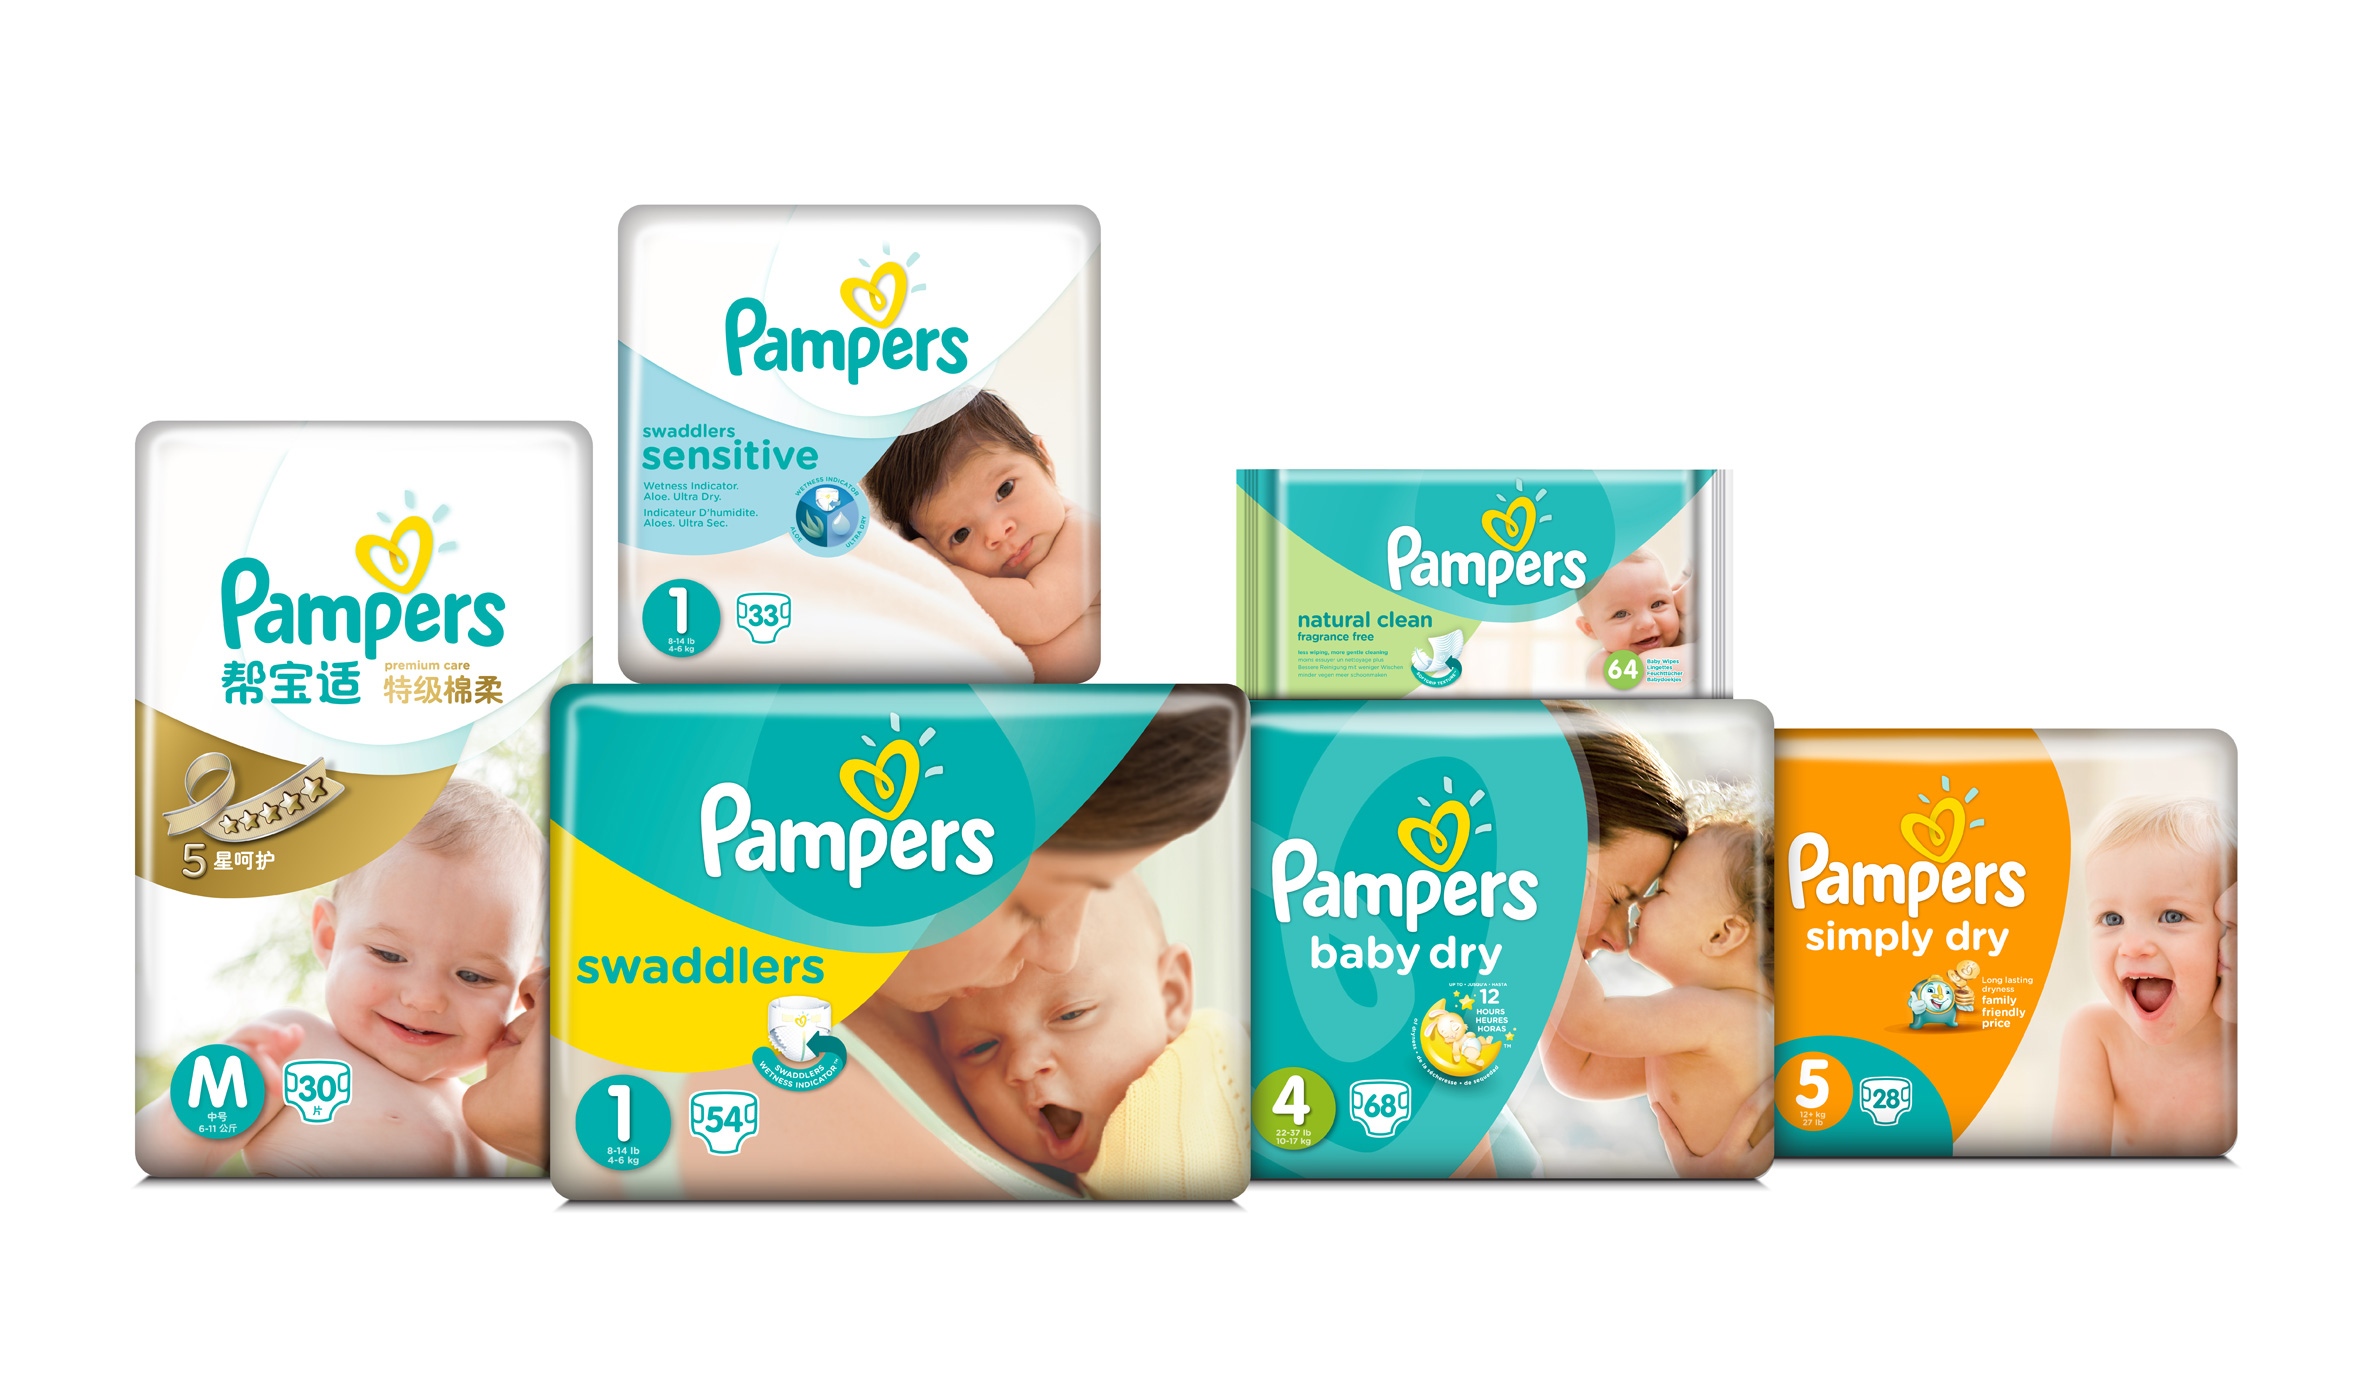 Office Pampers Packaging Line Up